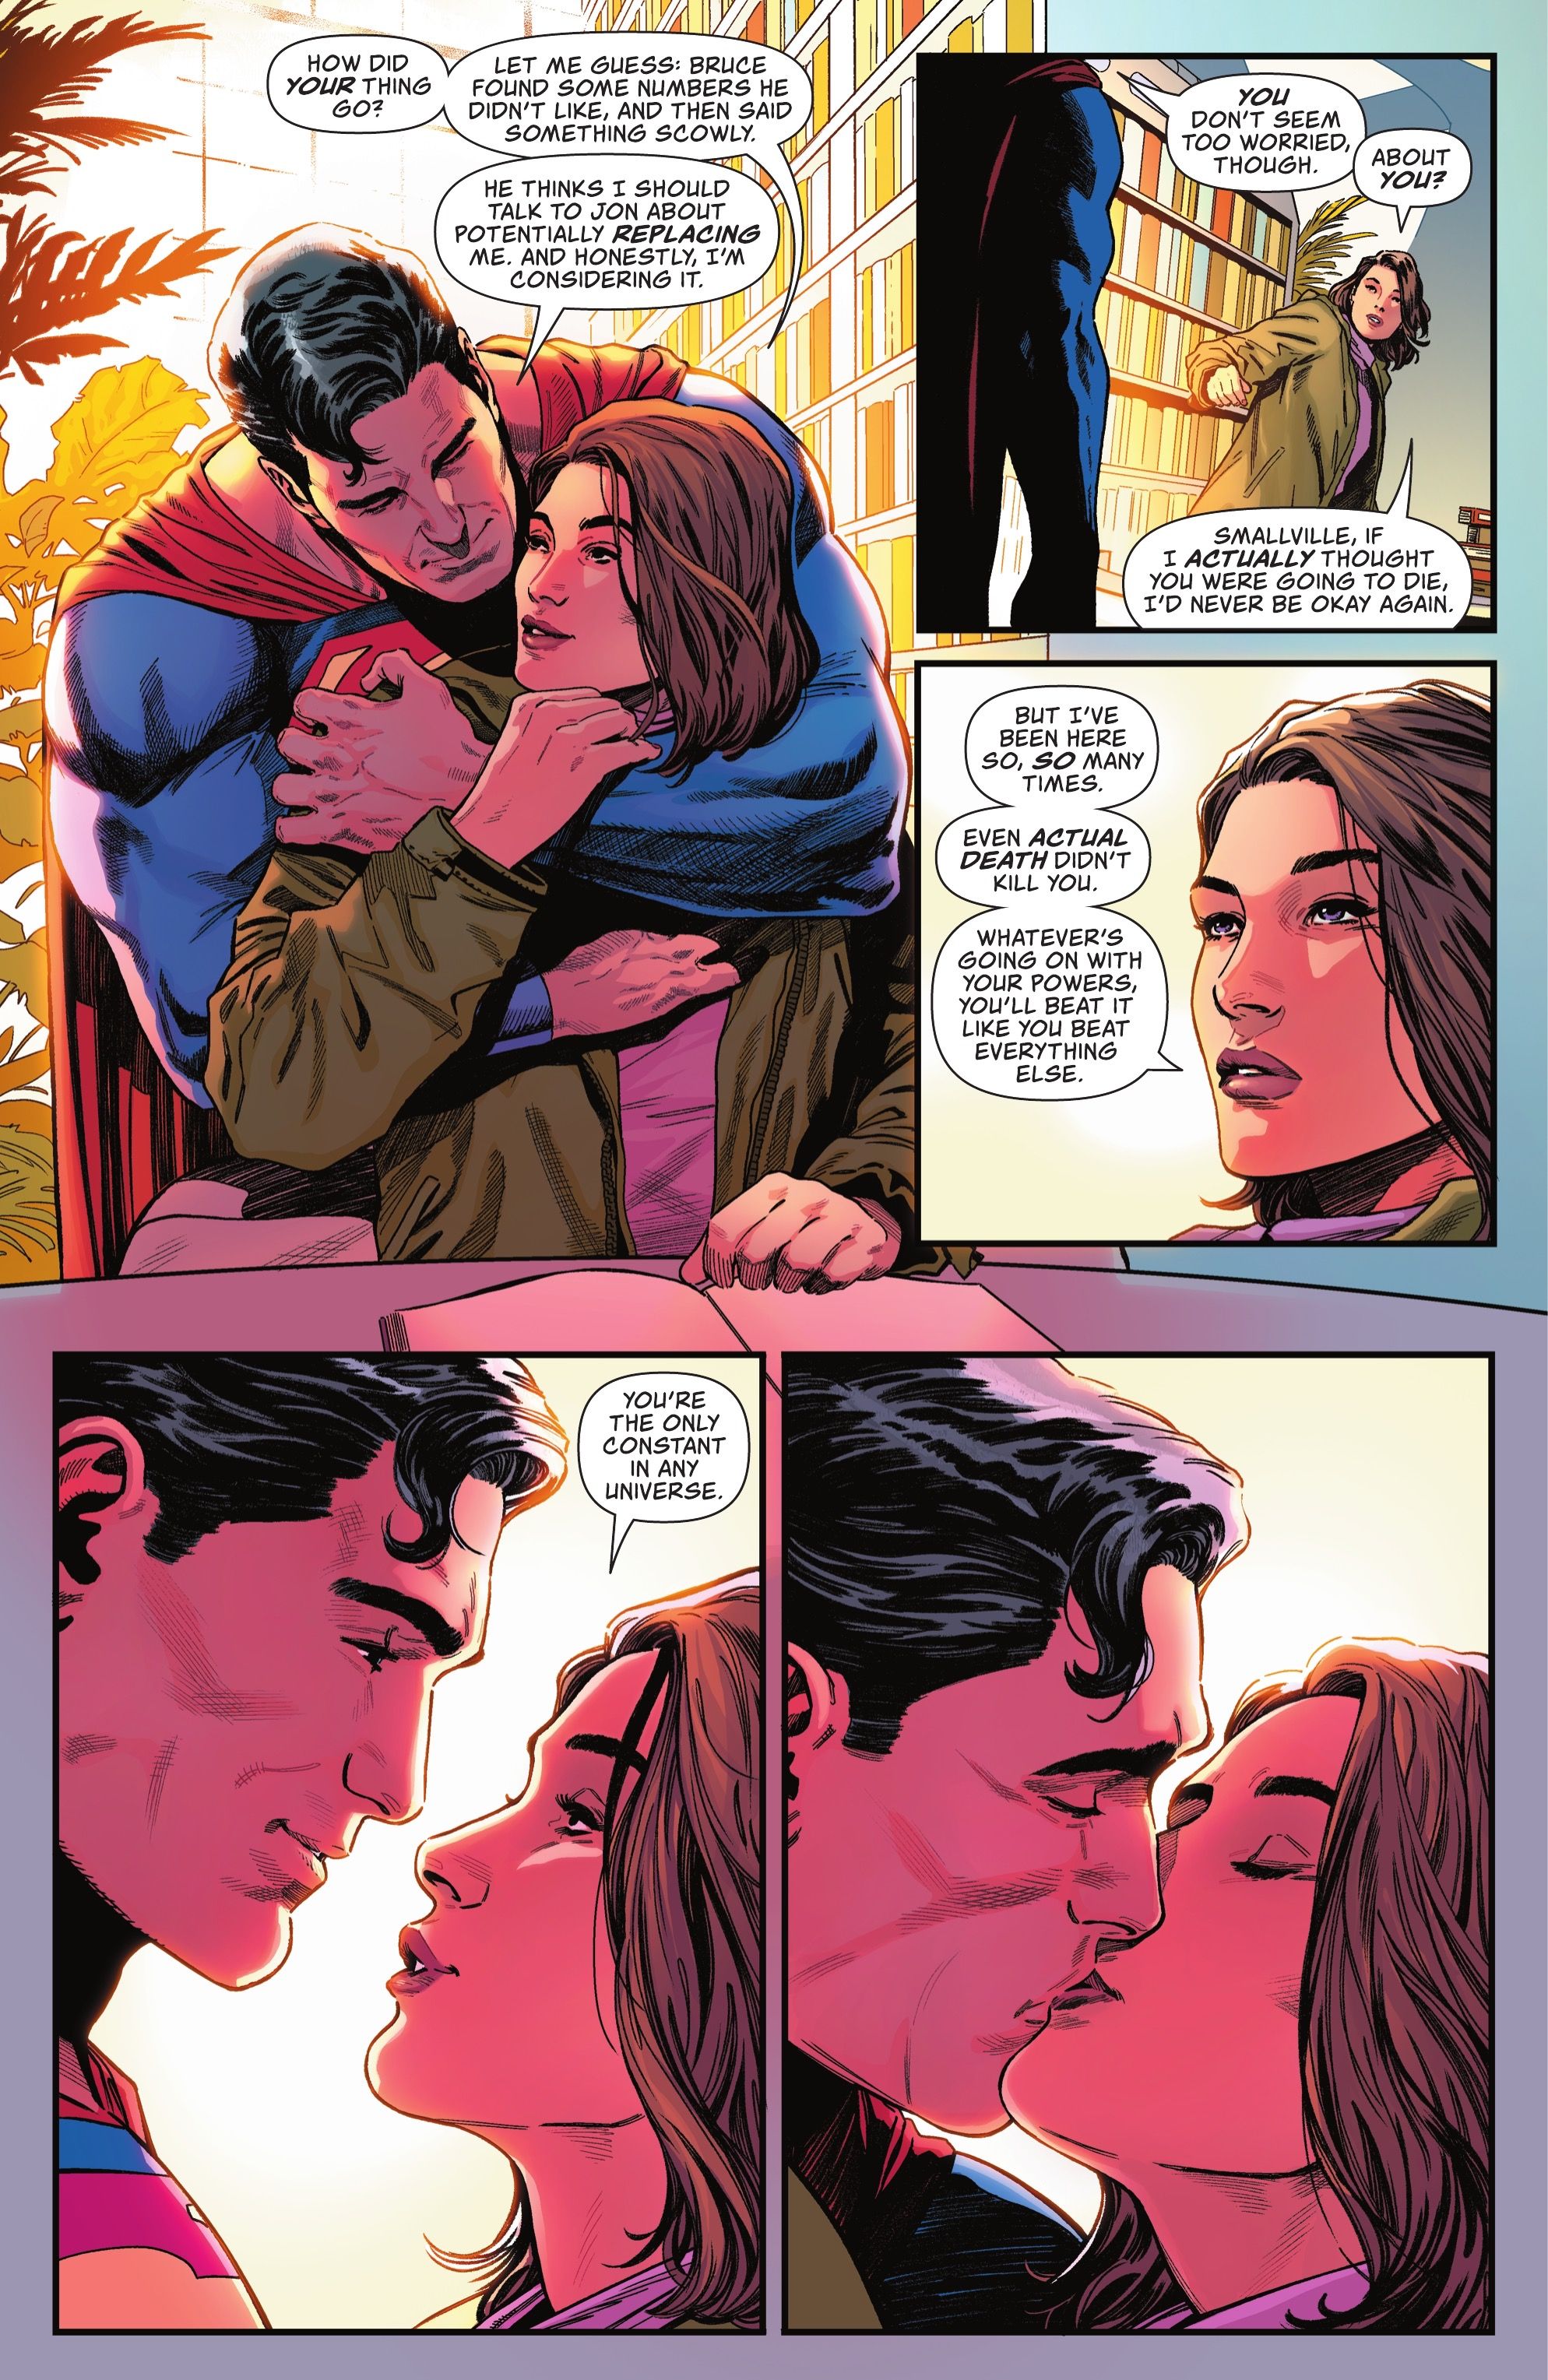 Lois Lane Knows Superman Can Never Actually Die (And She’s Right)